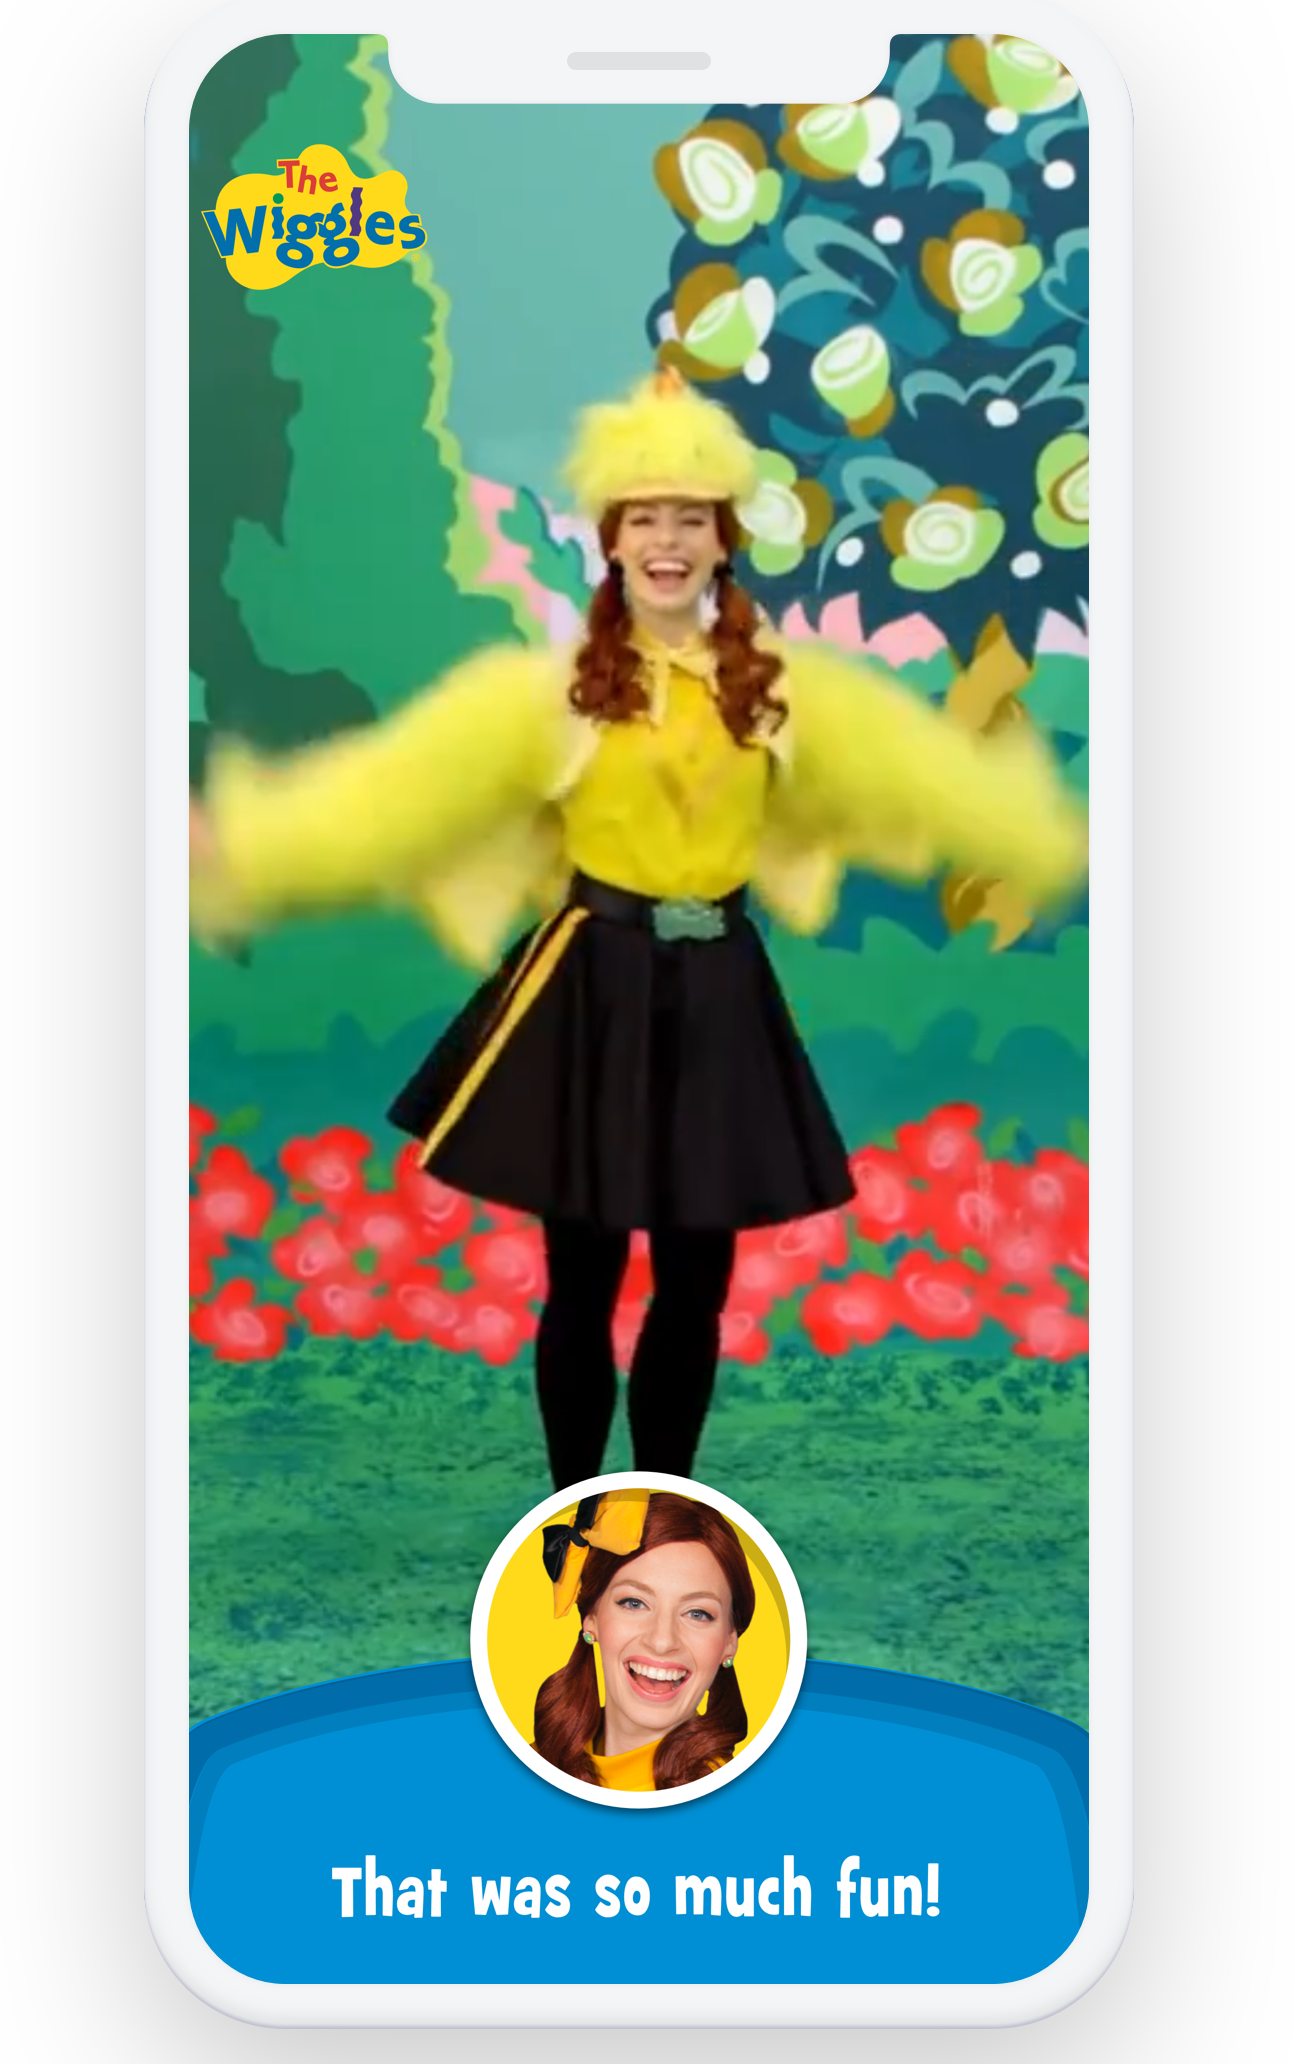 The new Wiggles app